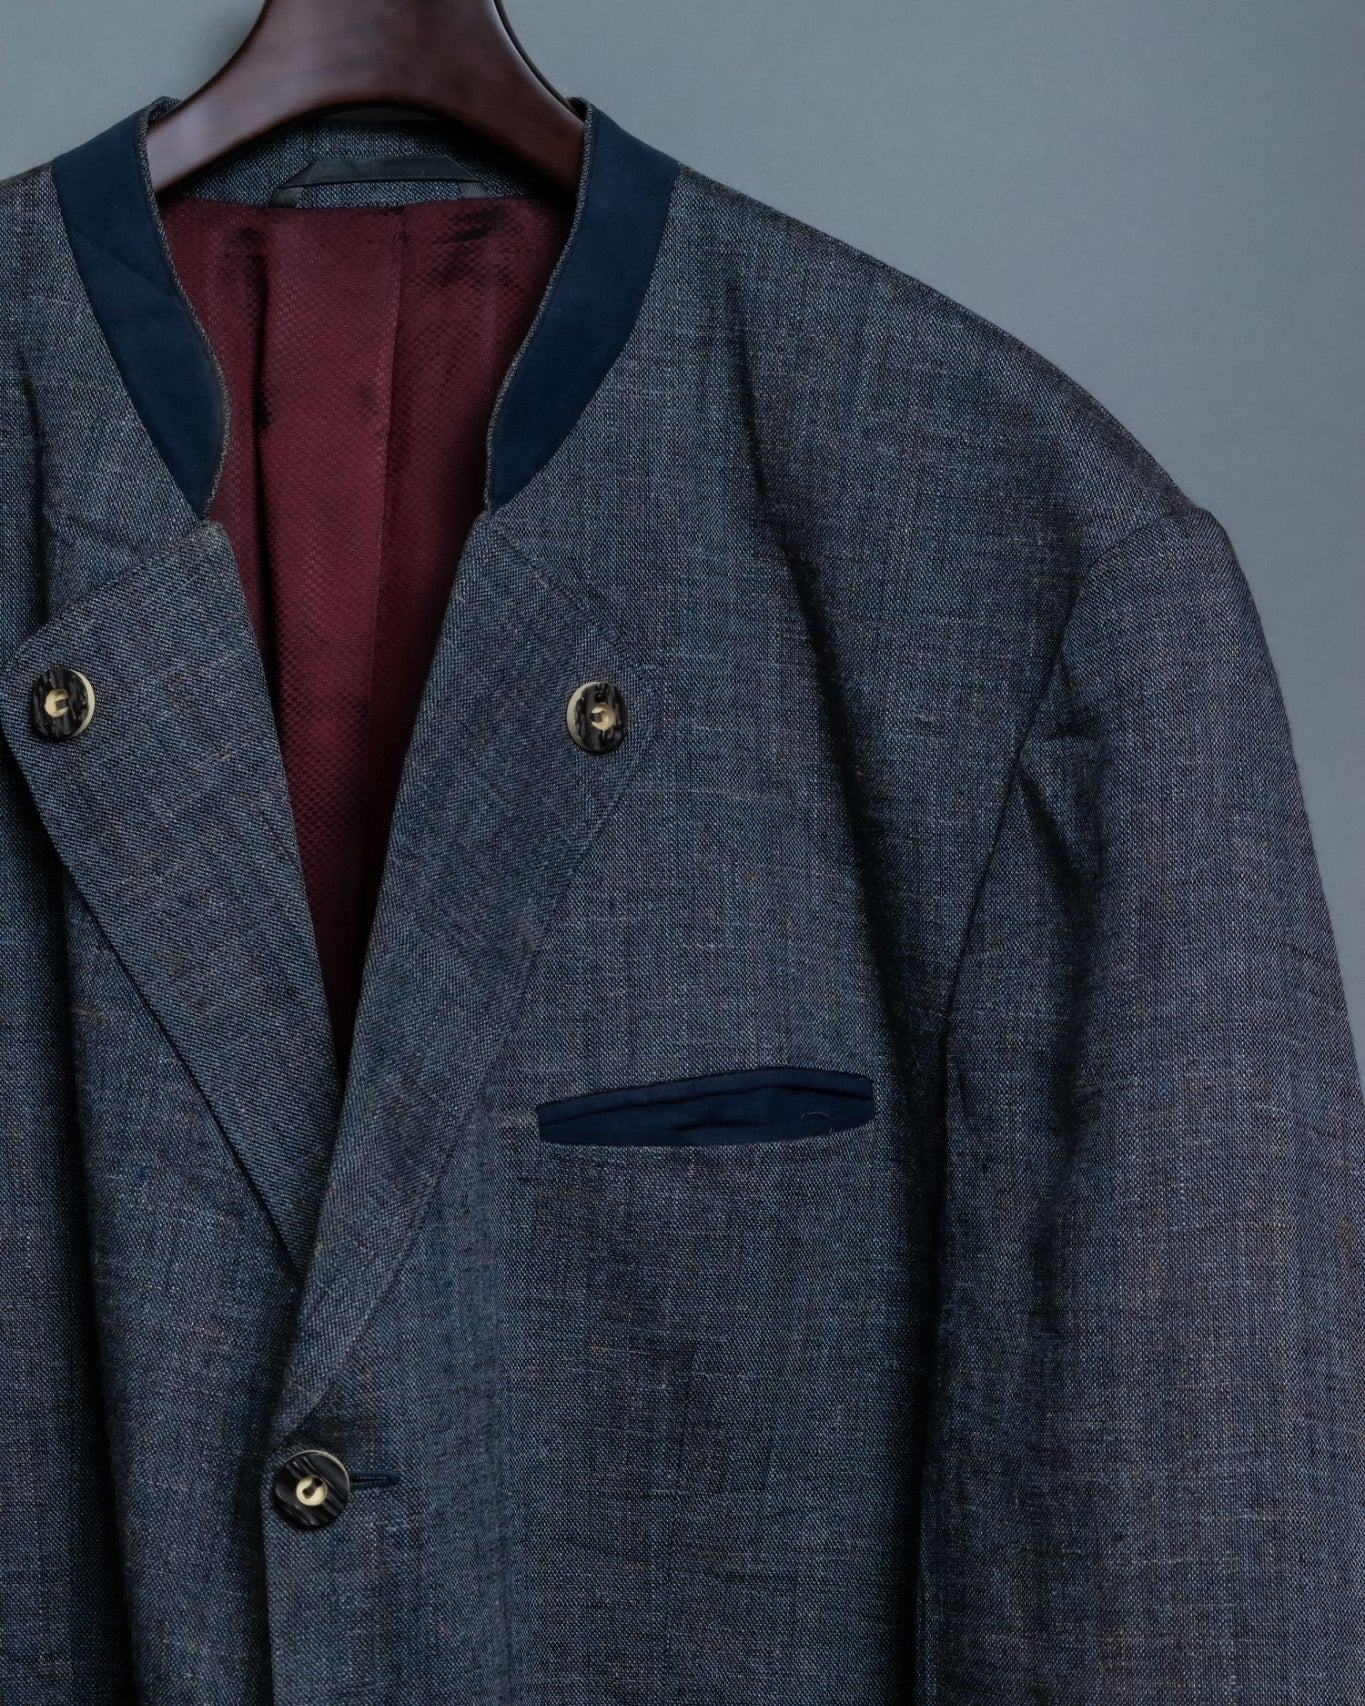 Tyrolean Tailored Classical Jacket